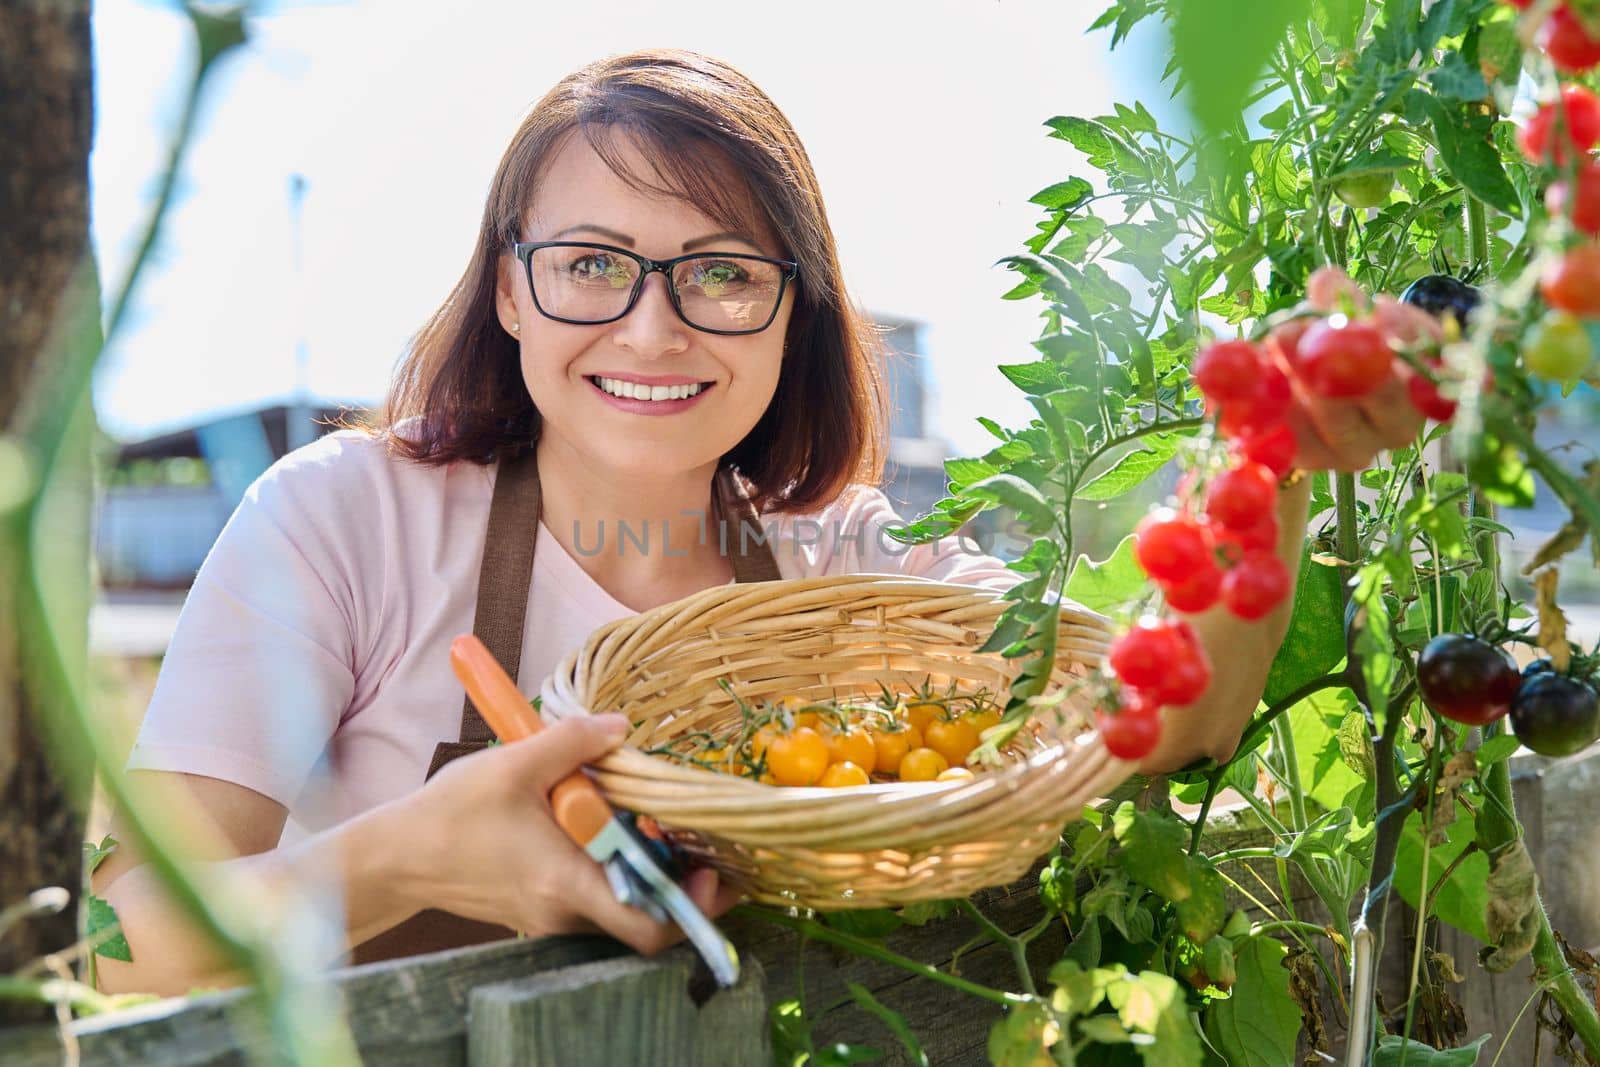 Smiling middle aged woman harvesting ripe cherry tomatoes. Growing natural organic vegetables, farming, gardening, hobby concept